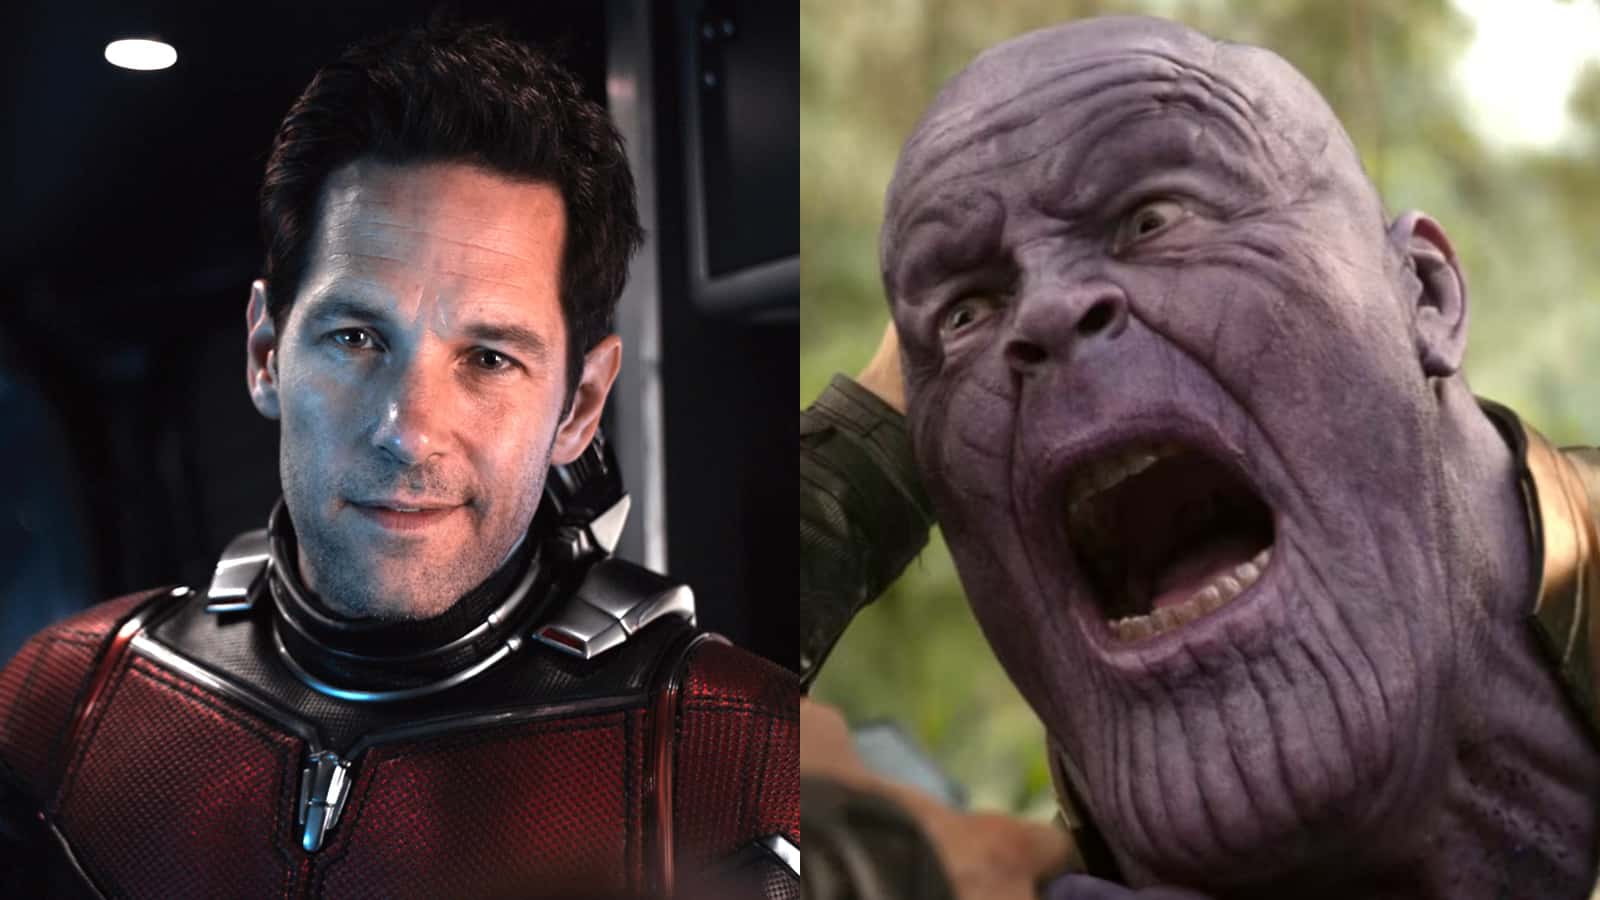 Paul Rudd's Ant-Man and Thanos in the Marvel Cinematic Universe